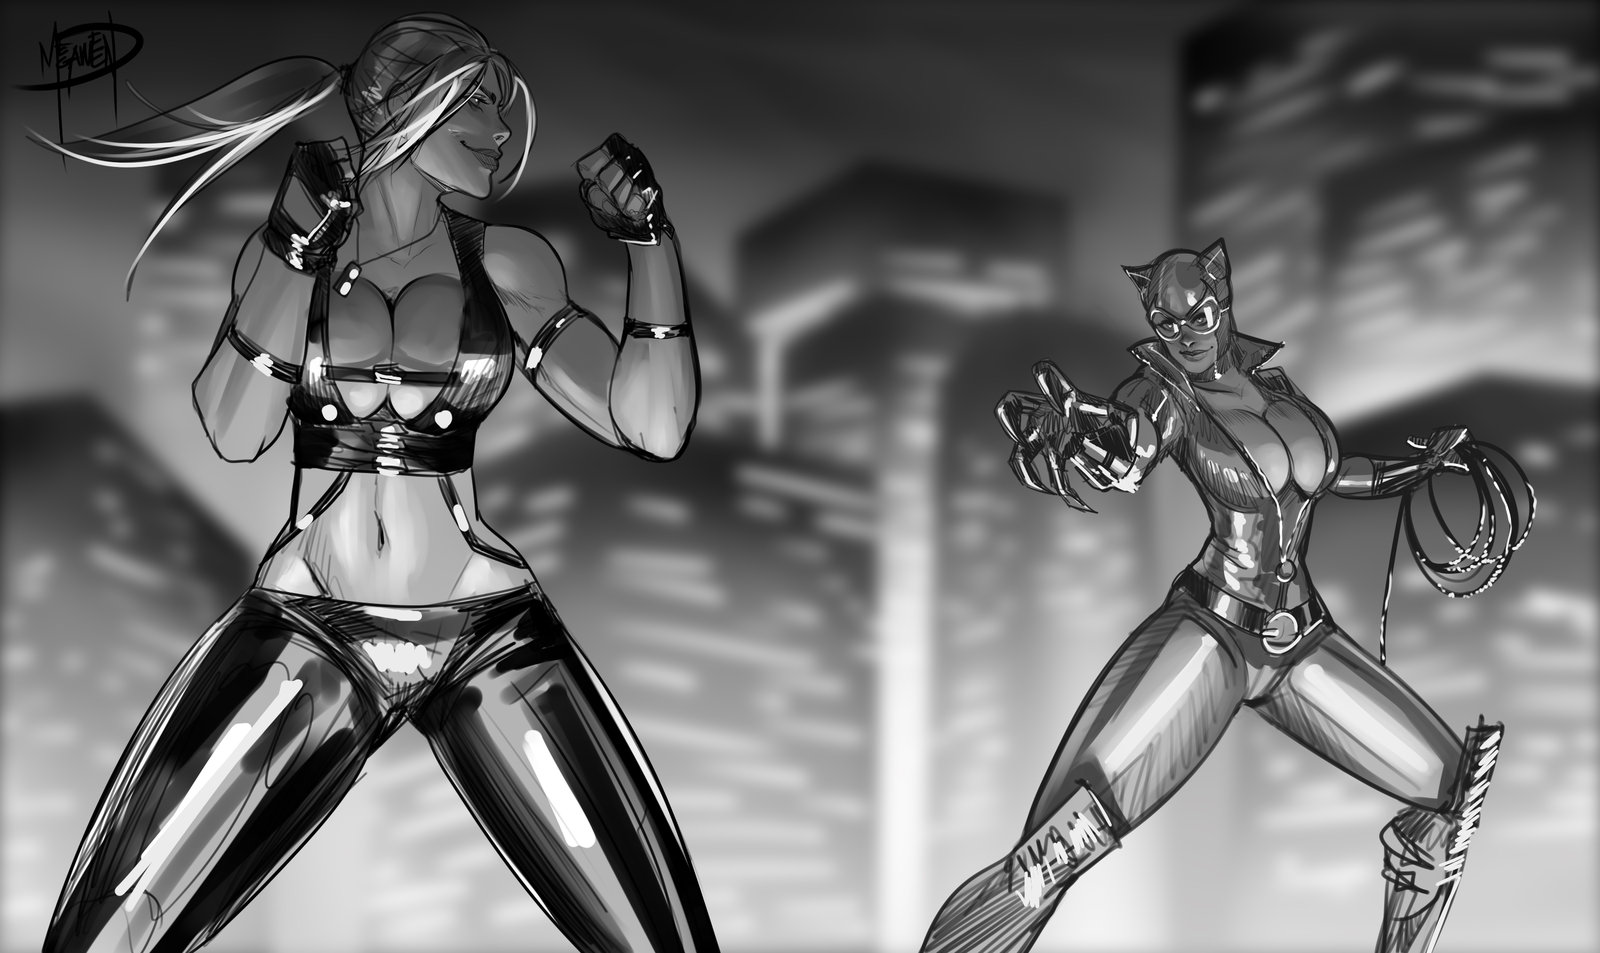 Sonya Blade vs Catwoman by megaween on